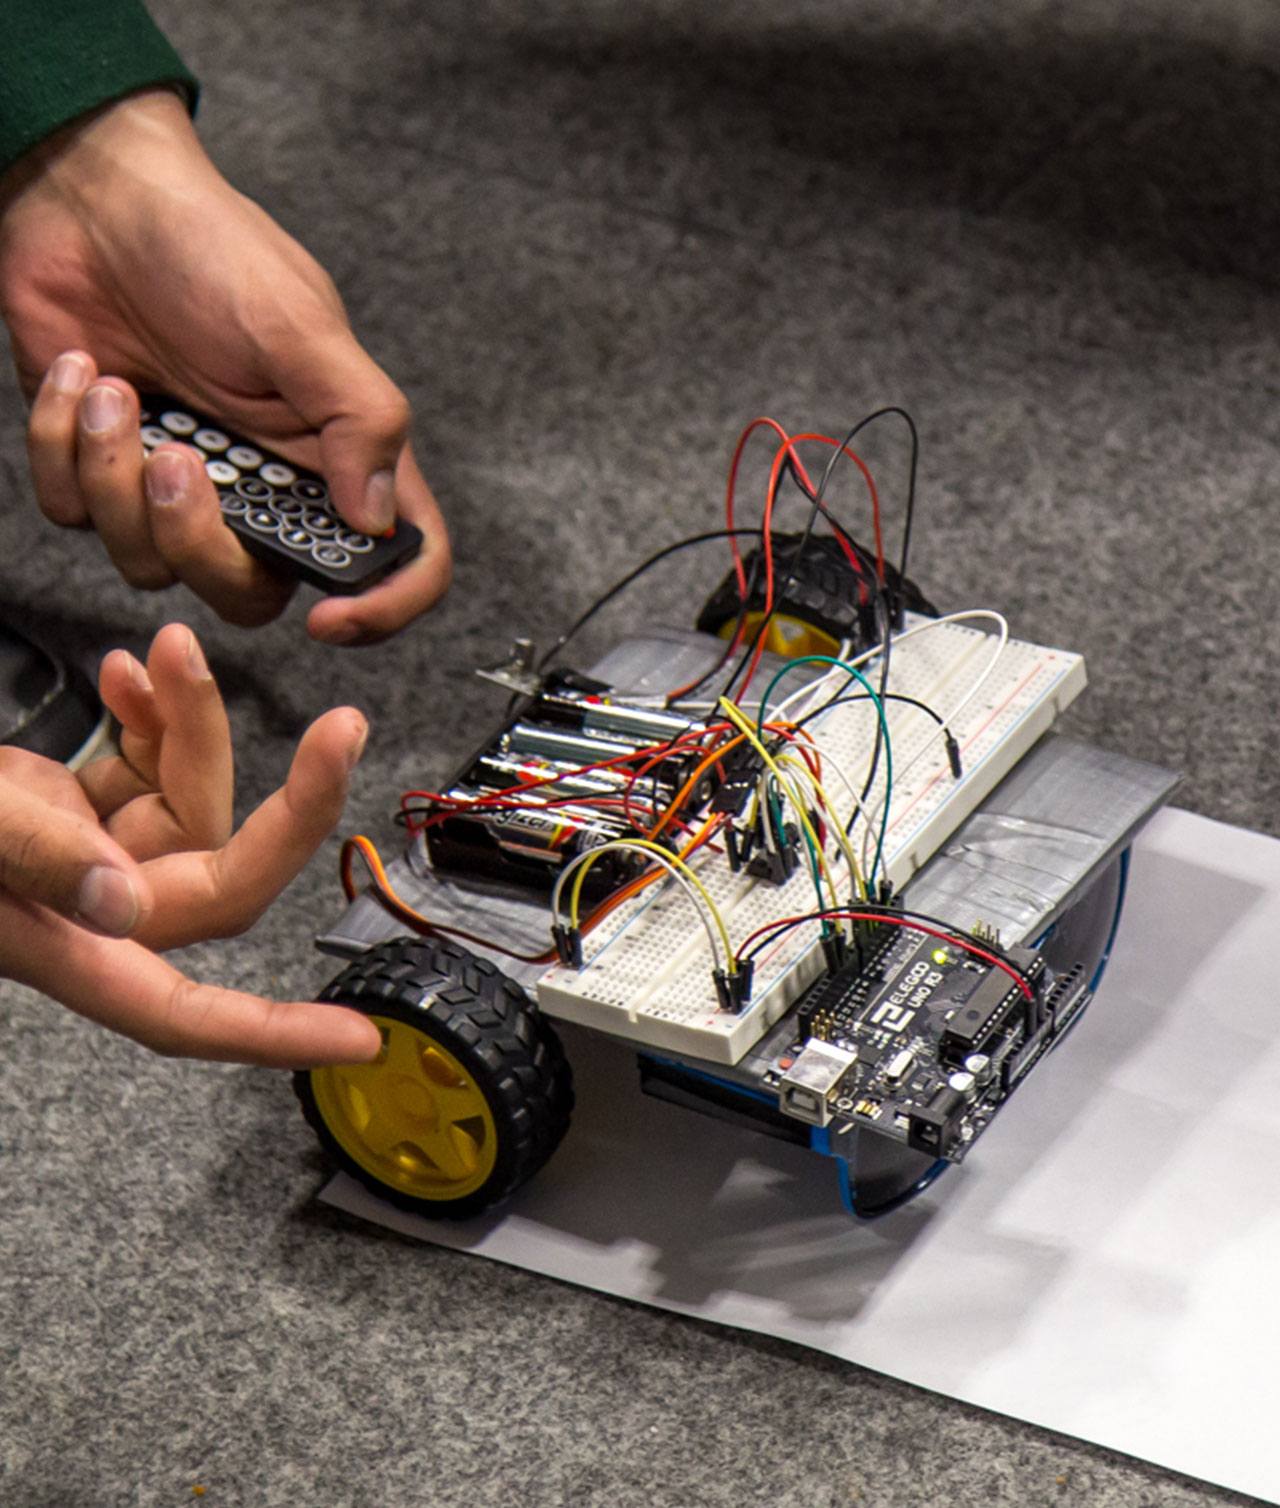 A close-up of a robotic creation and two hands. One hand holds a controller and the other gestures to the robot.